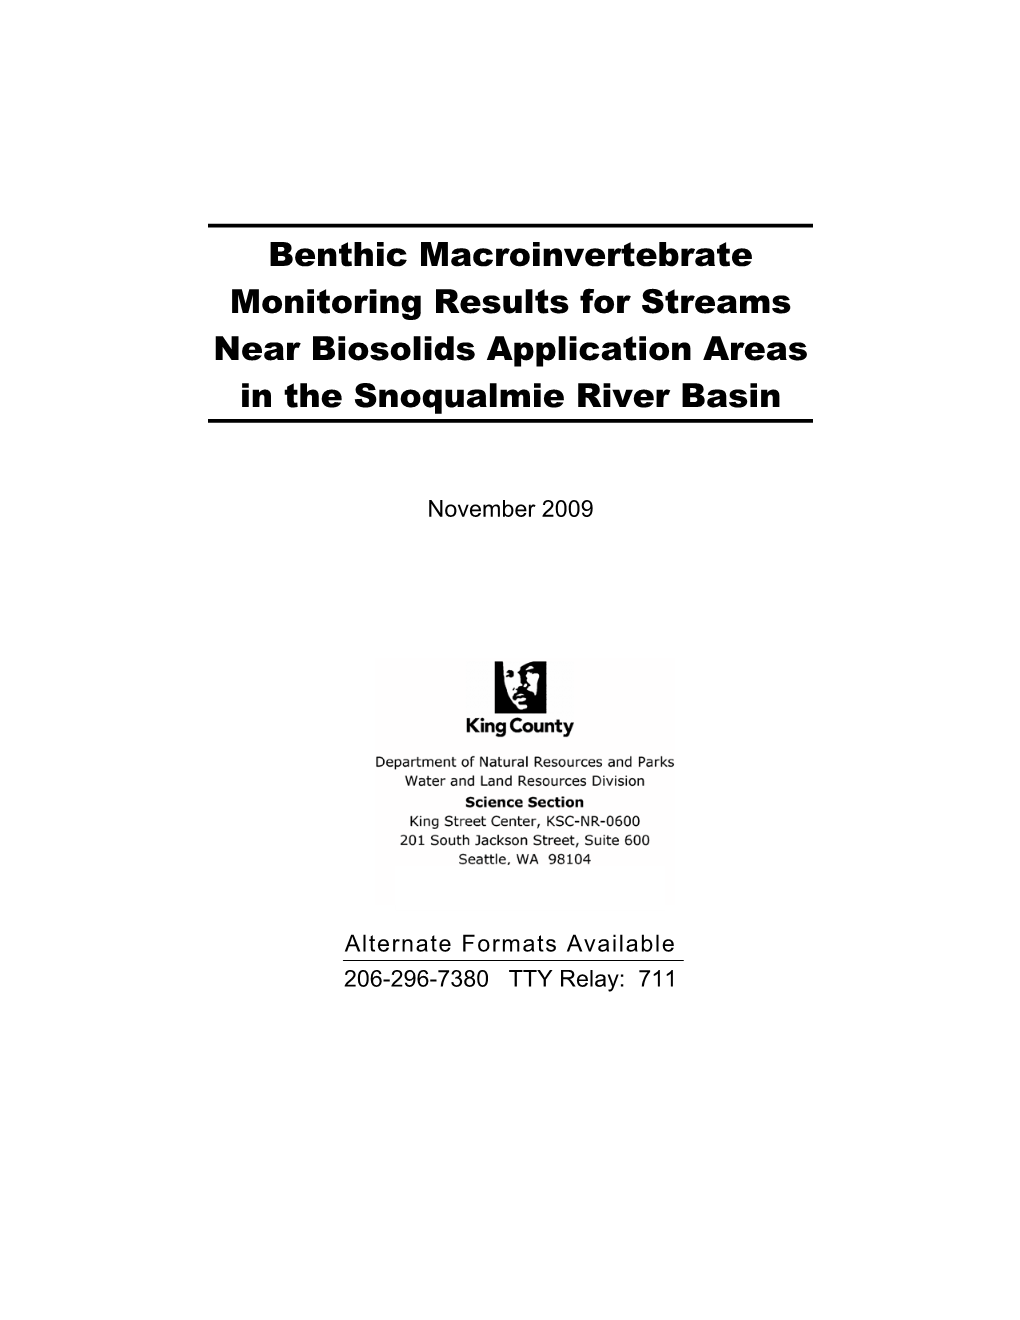 Benthic Macroinvertebrate Monitoring Results for Streams Near Biosolids Application Areas in the Snoqualmie River Basin